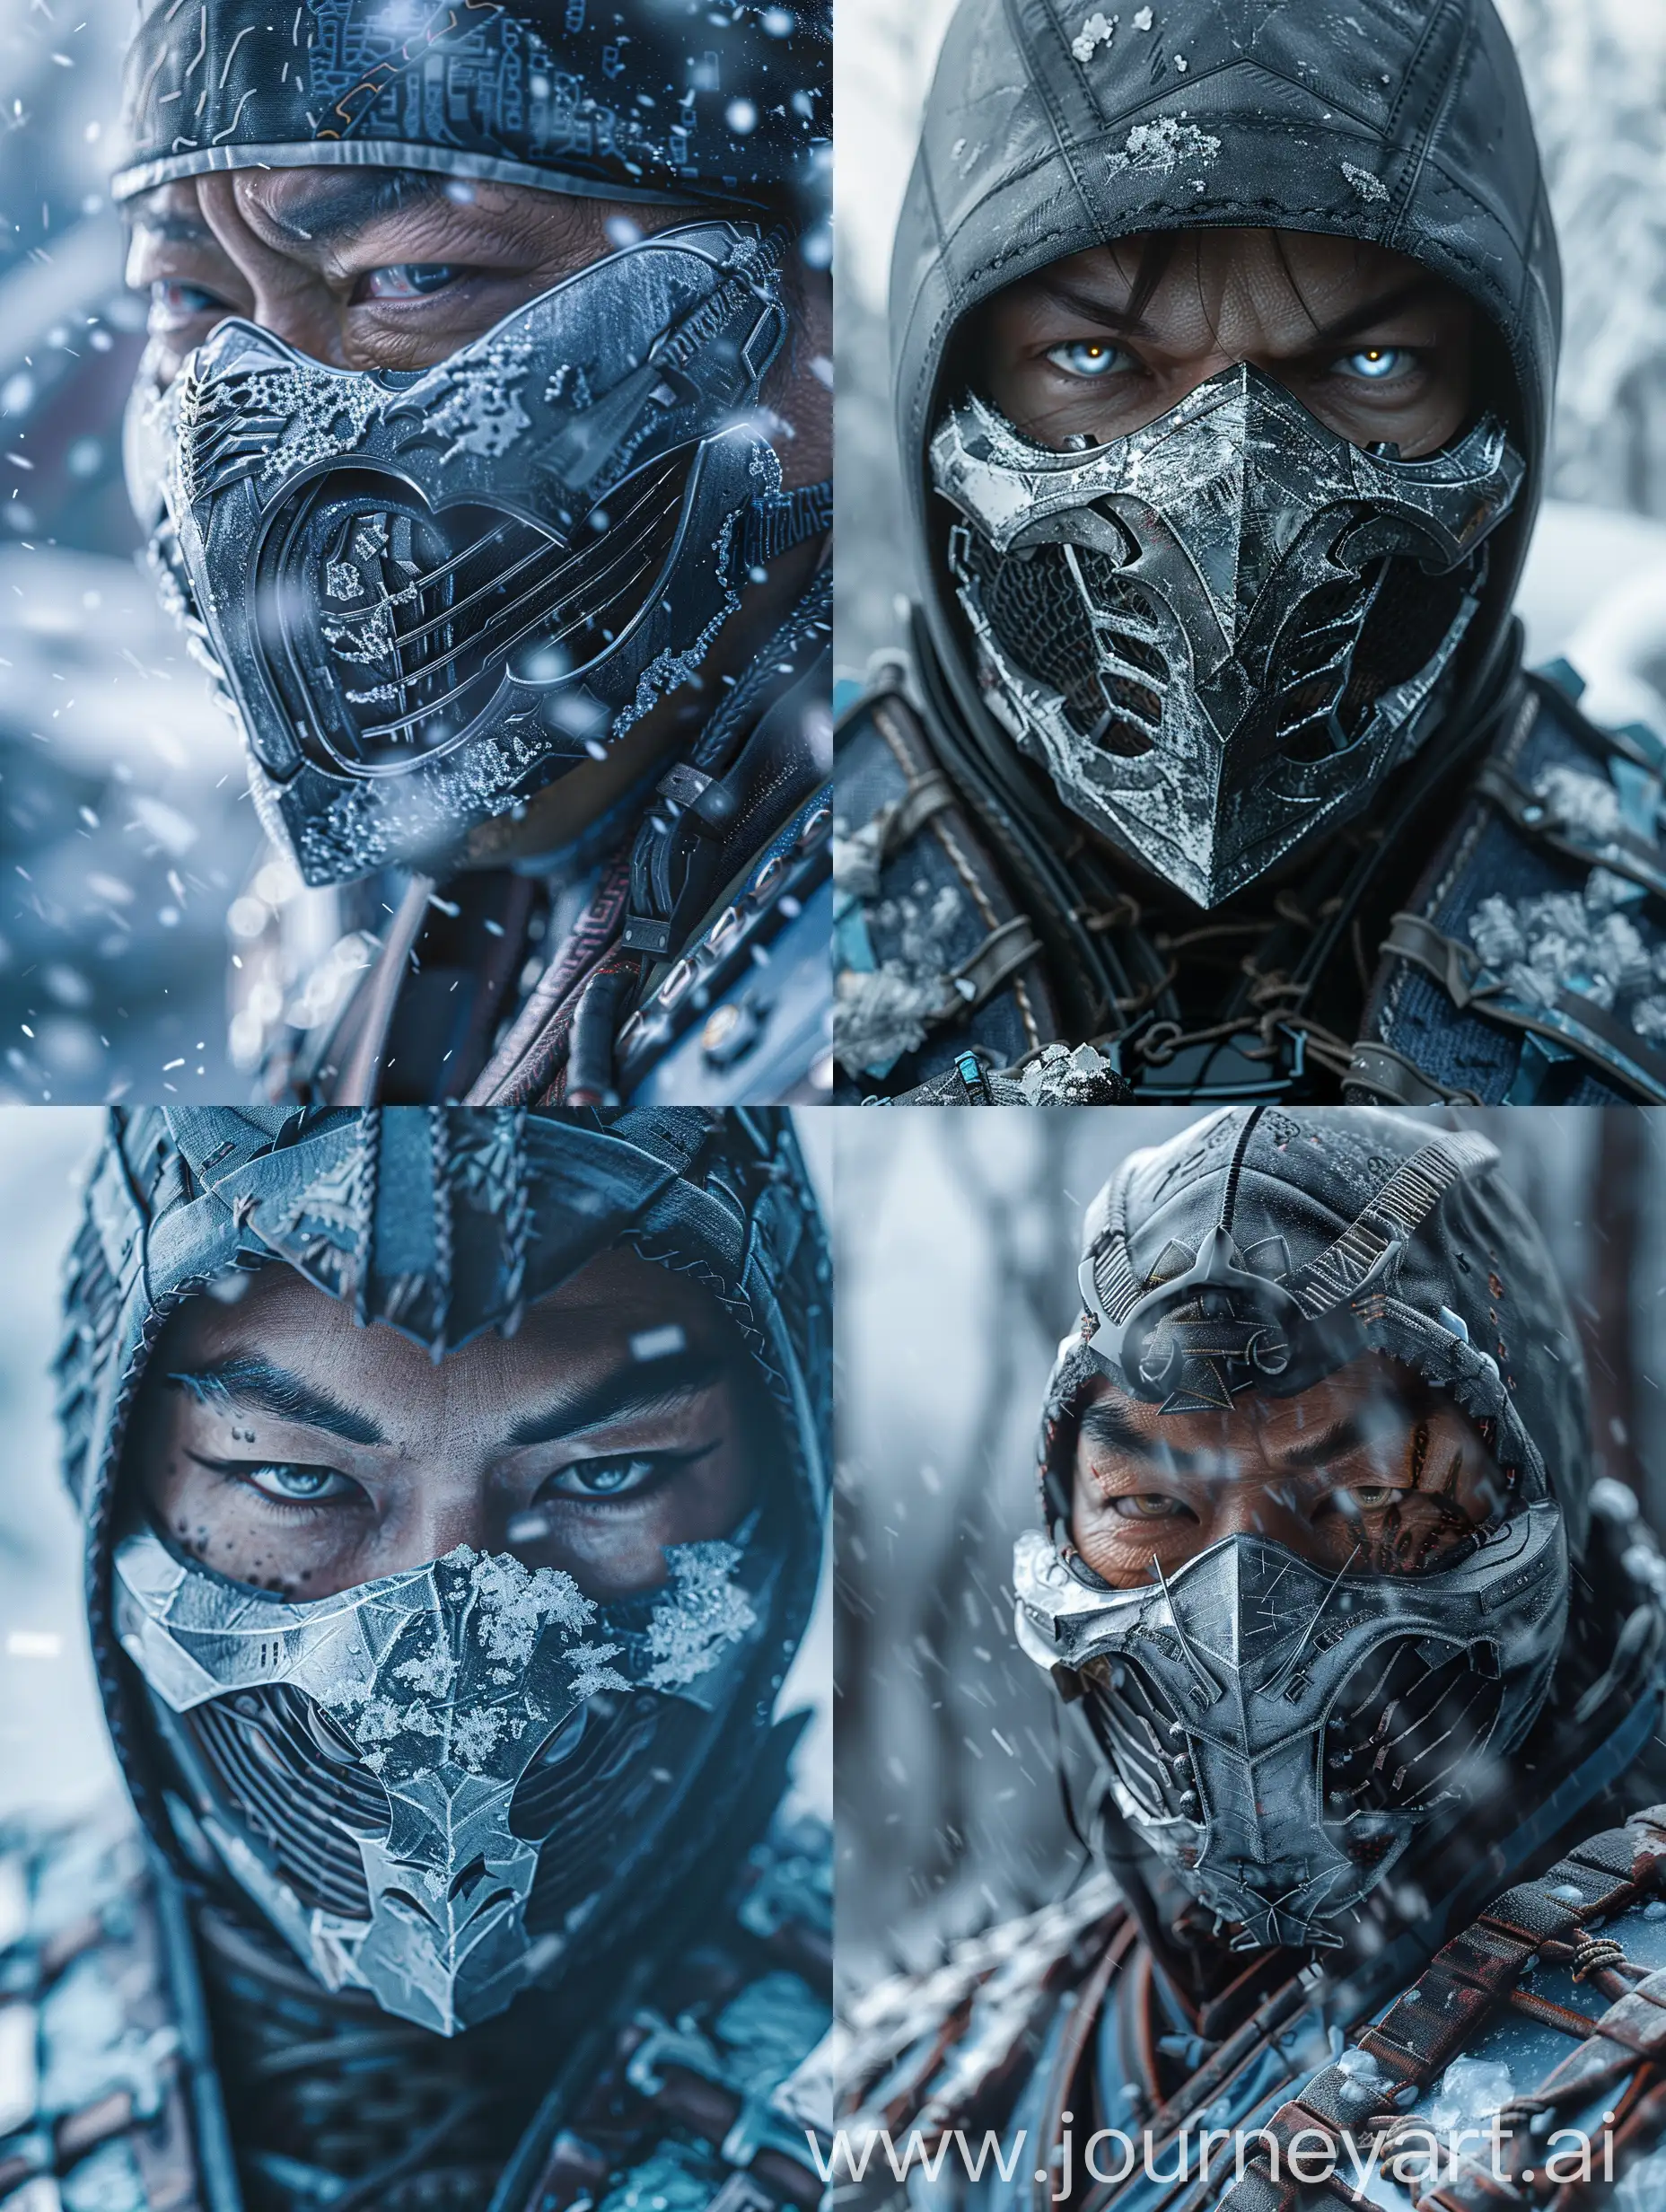 a close up of a person wearing a mask, inspired by Kanō Hōgai, reddit, cobra, snoop dogg in mortal kombat, armor made of ice, shattered sky cinematic, mk ninja, cinematic pose, tom hardy, wearing techwear and armor, avatar image